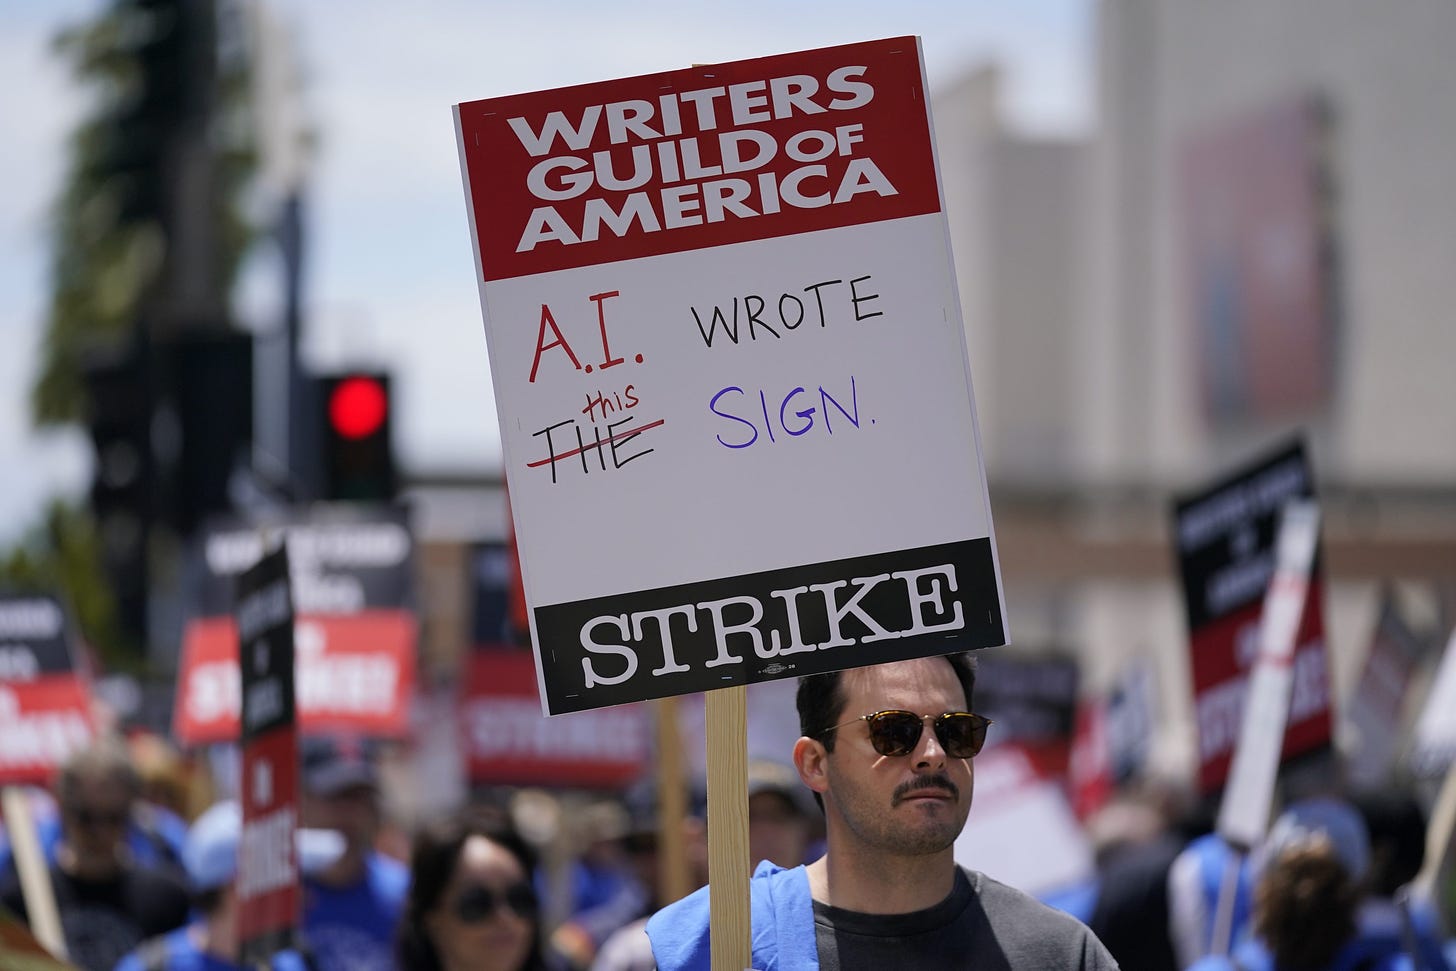 Hollywood writers' strike has ChatGPT, AI subtext | Fortune